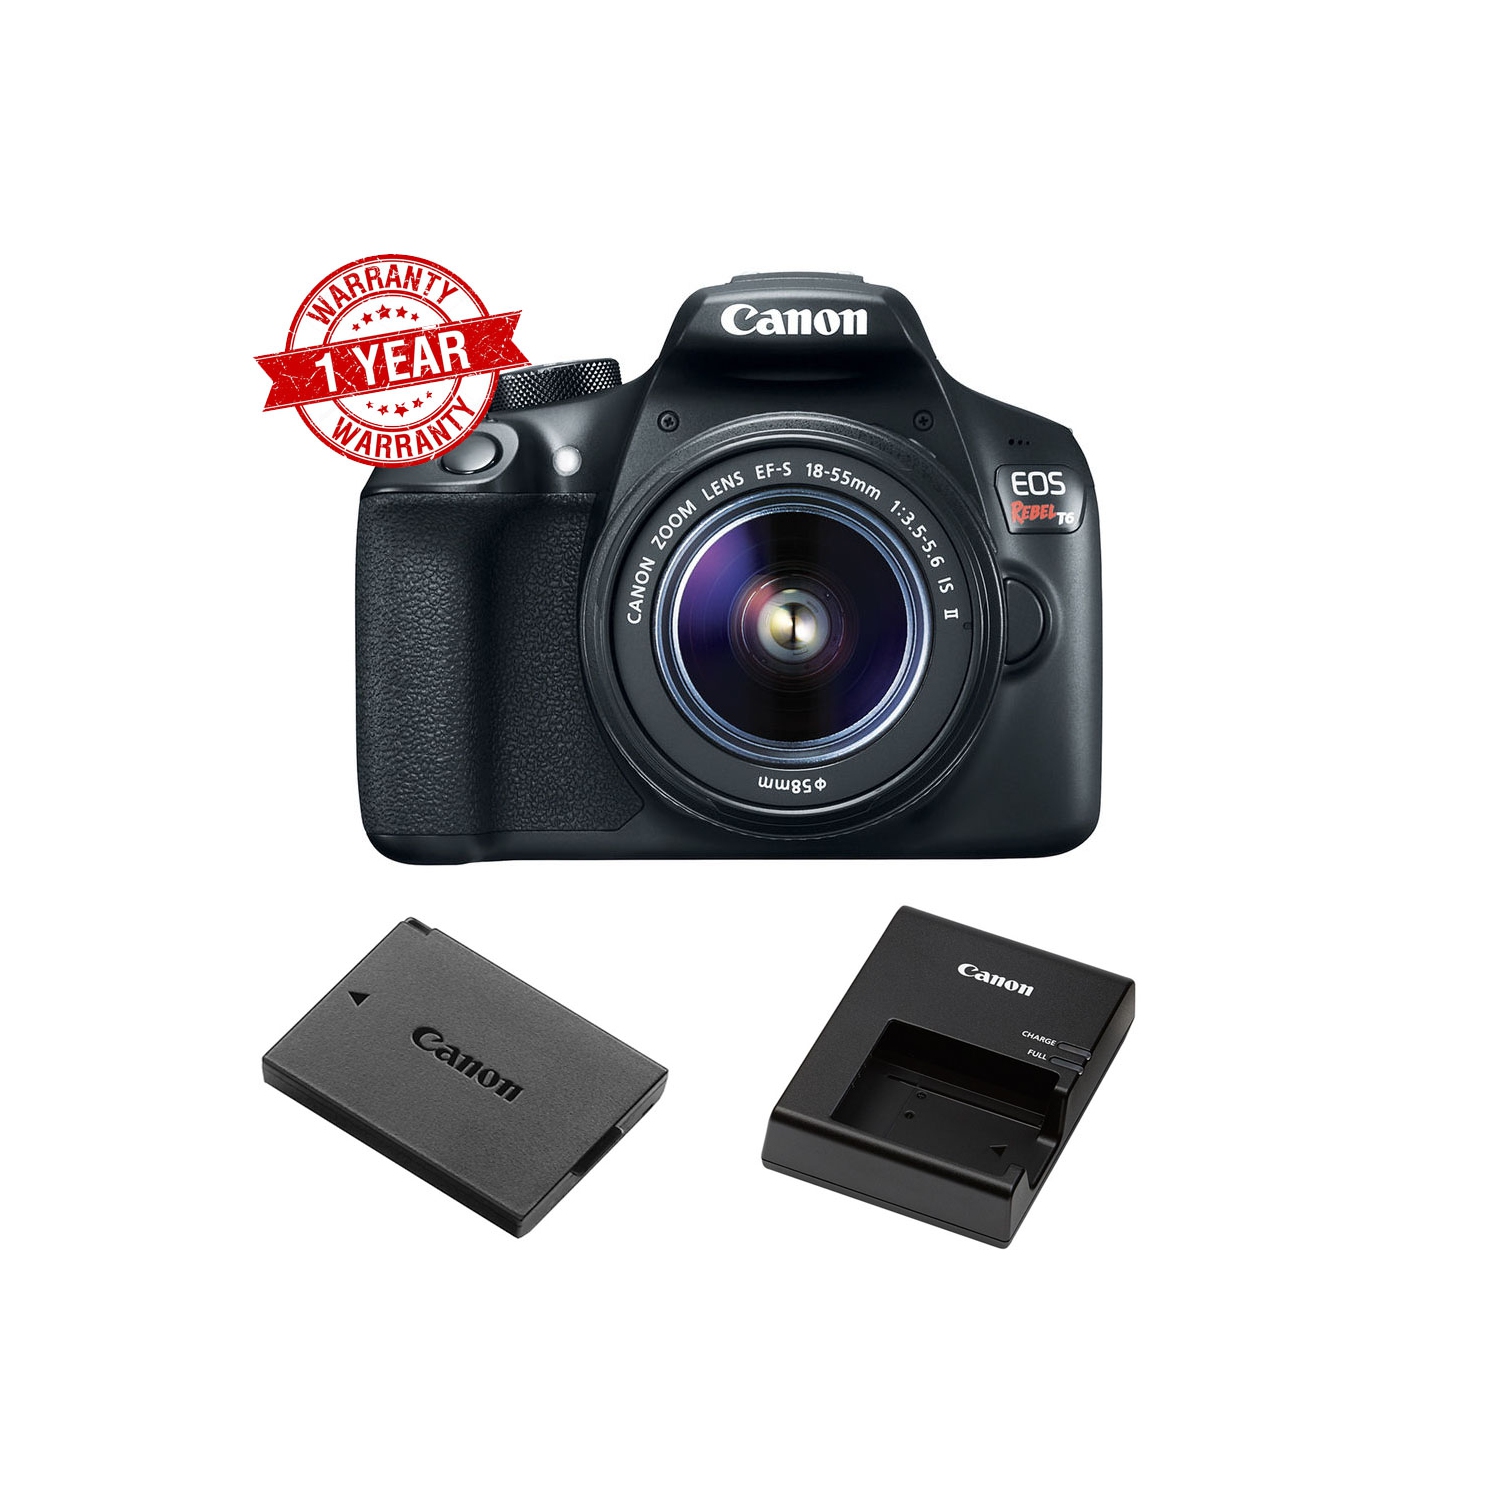 Canon EOS Rebel 1300D/ T6 DSLR Camera with 18-55mm Lens (1300D) USA - US Version w/ Seller Warranty